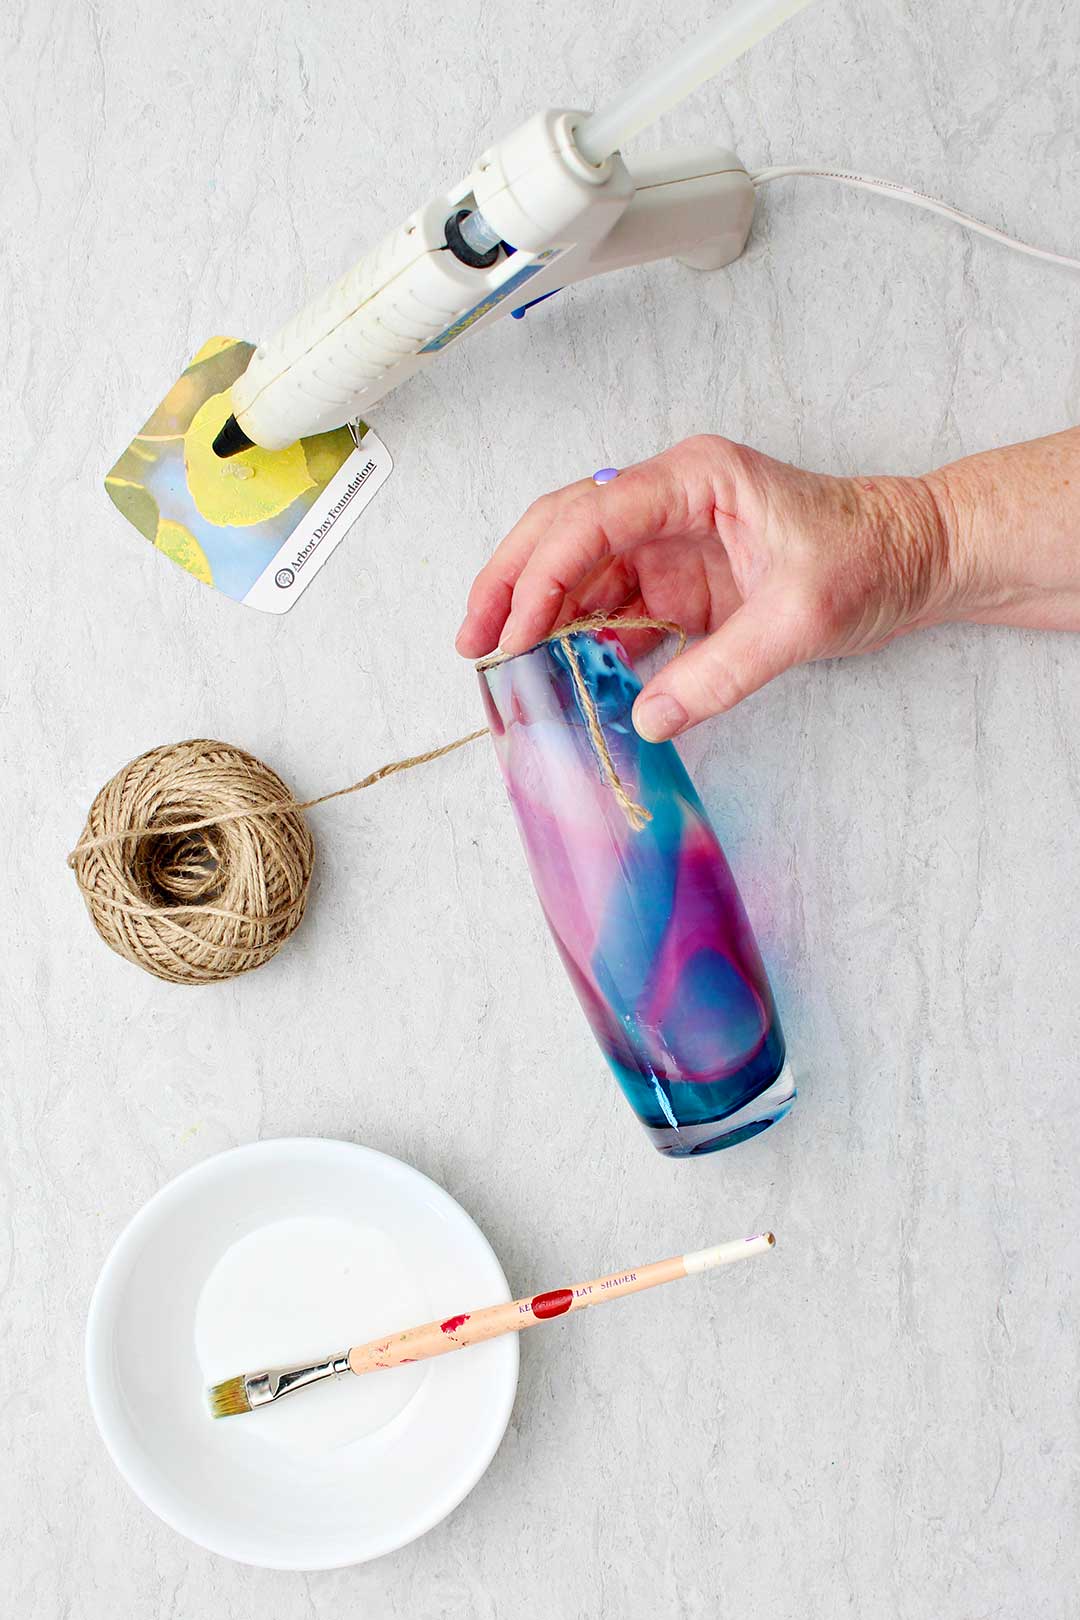 Hand holding glass vase with the starting of the twine wrapping glued to it with glue gun and white glue with paint brush near by.